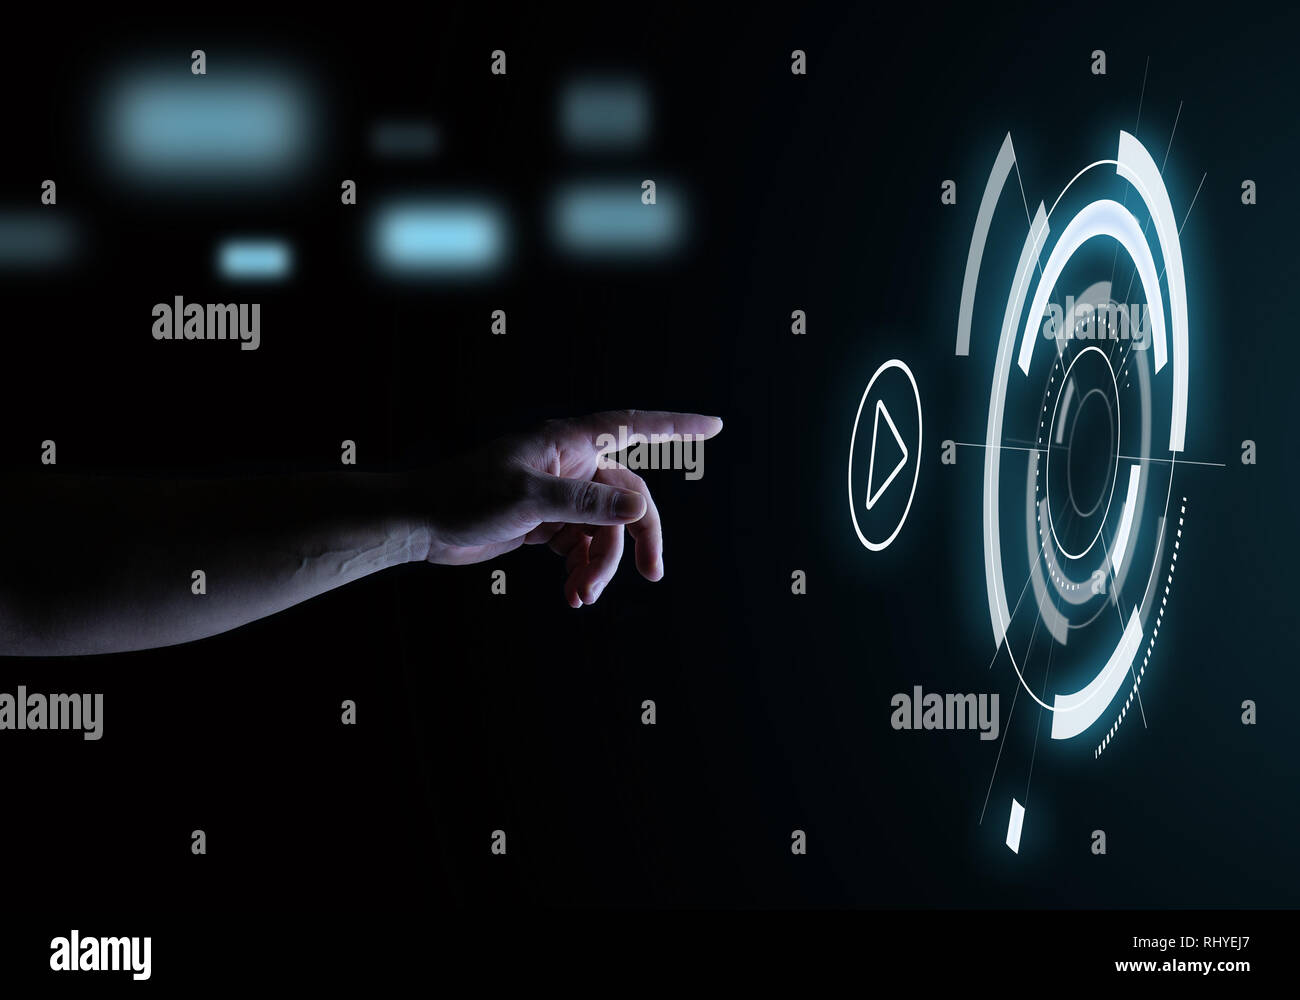 Media Player Digital Touch Hologram User Interface Technology Concept Stock Photo